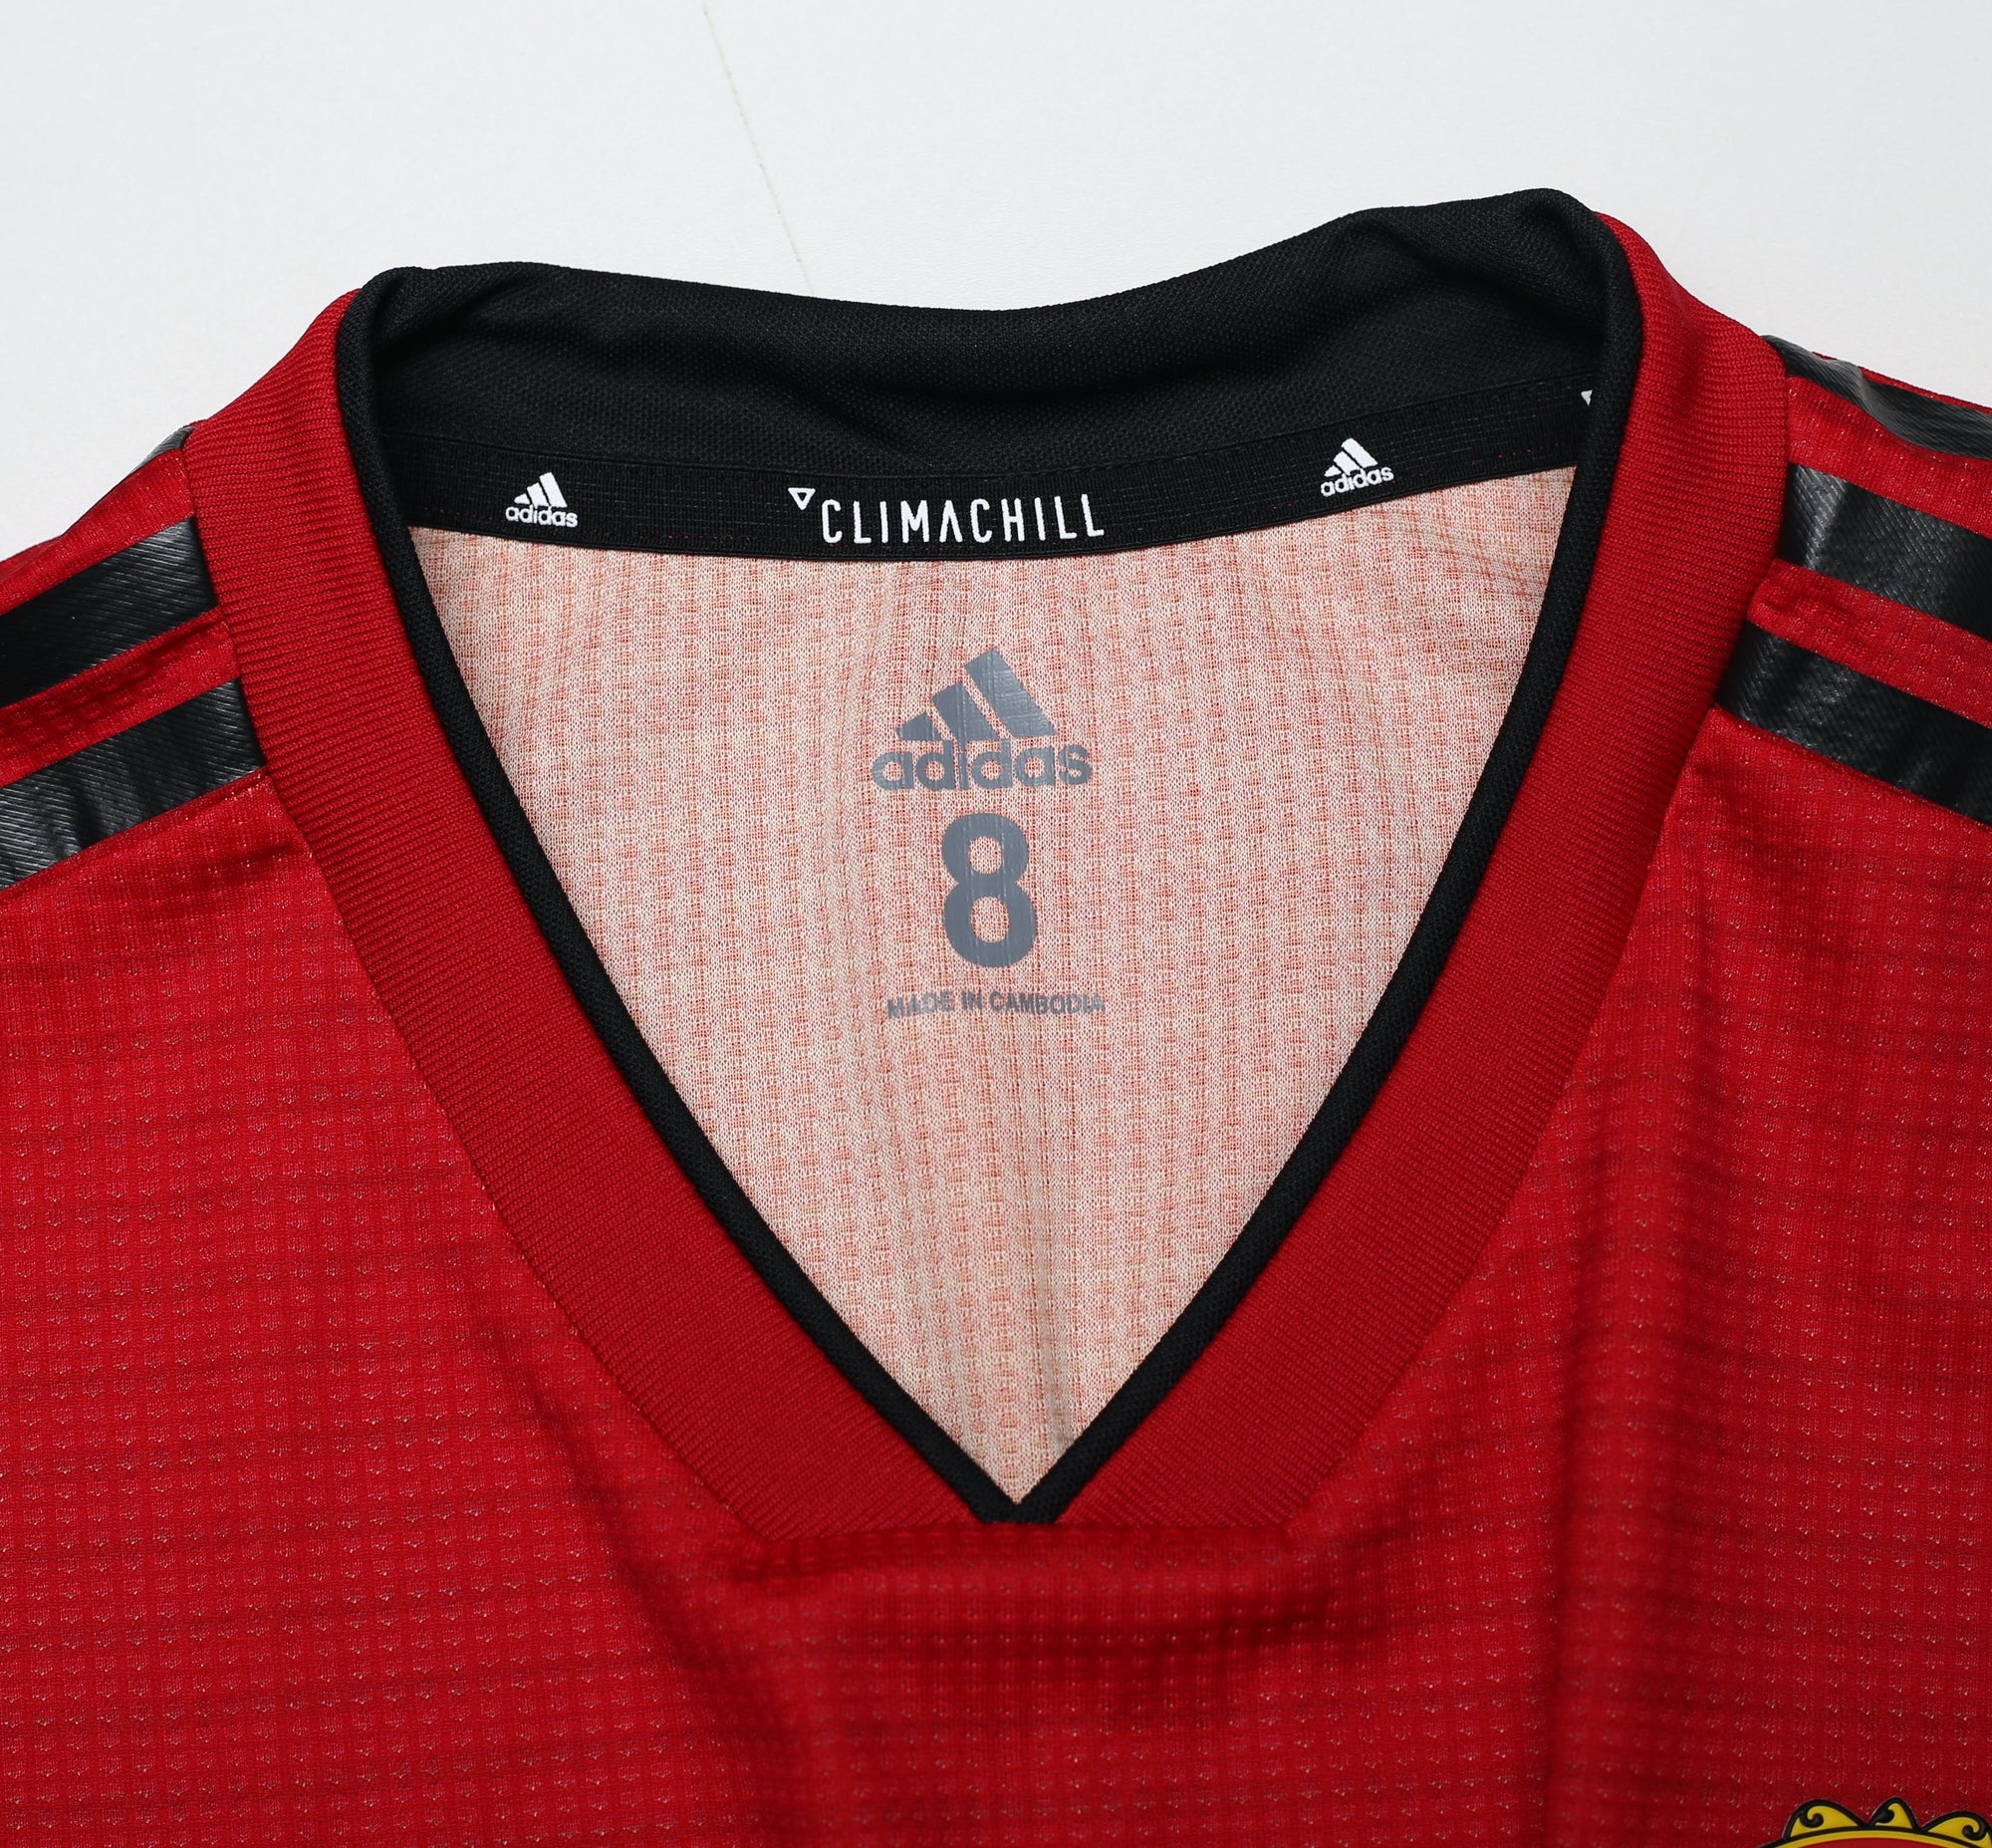 2018/19 MANCHESTER UNITED Adidas Player Issue Spec Home Football Shirt (8) BNY Mellon